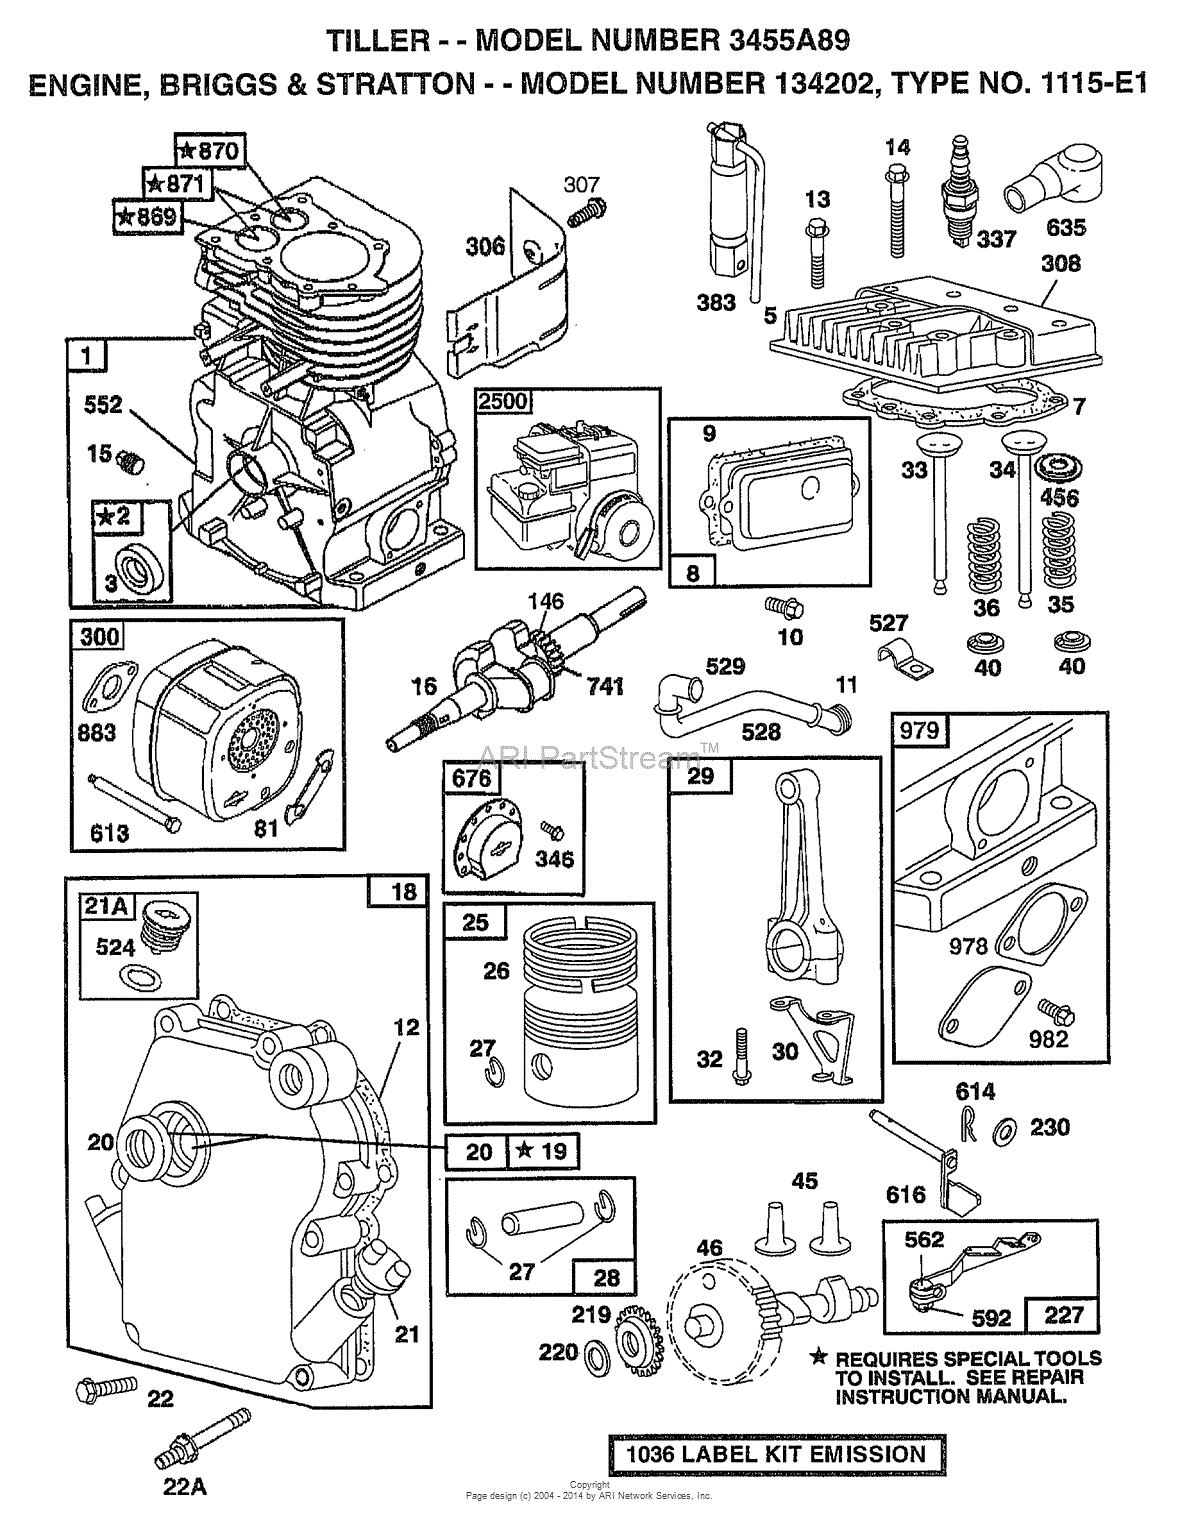 Aypelectrolux 3455a89 1998 Parts Diagram For Engine Briggs And Stratton